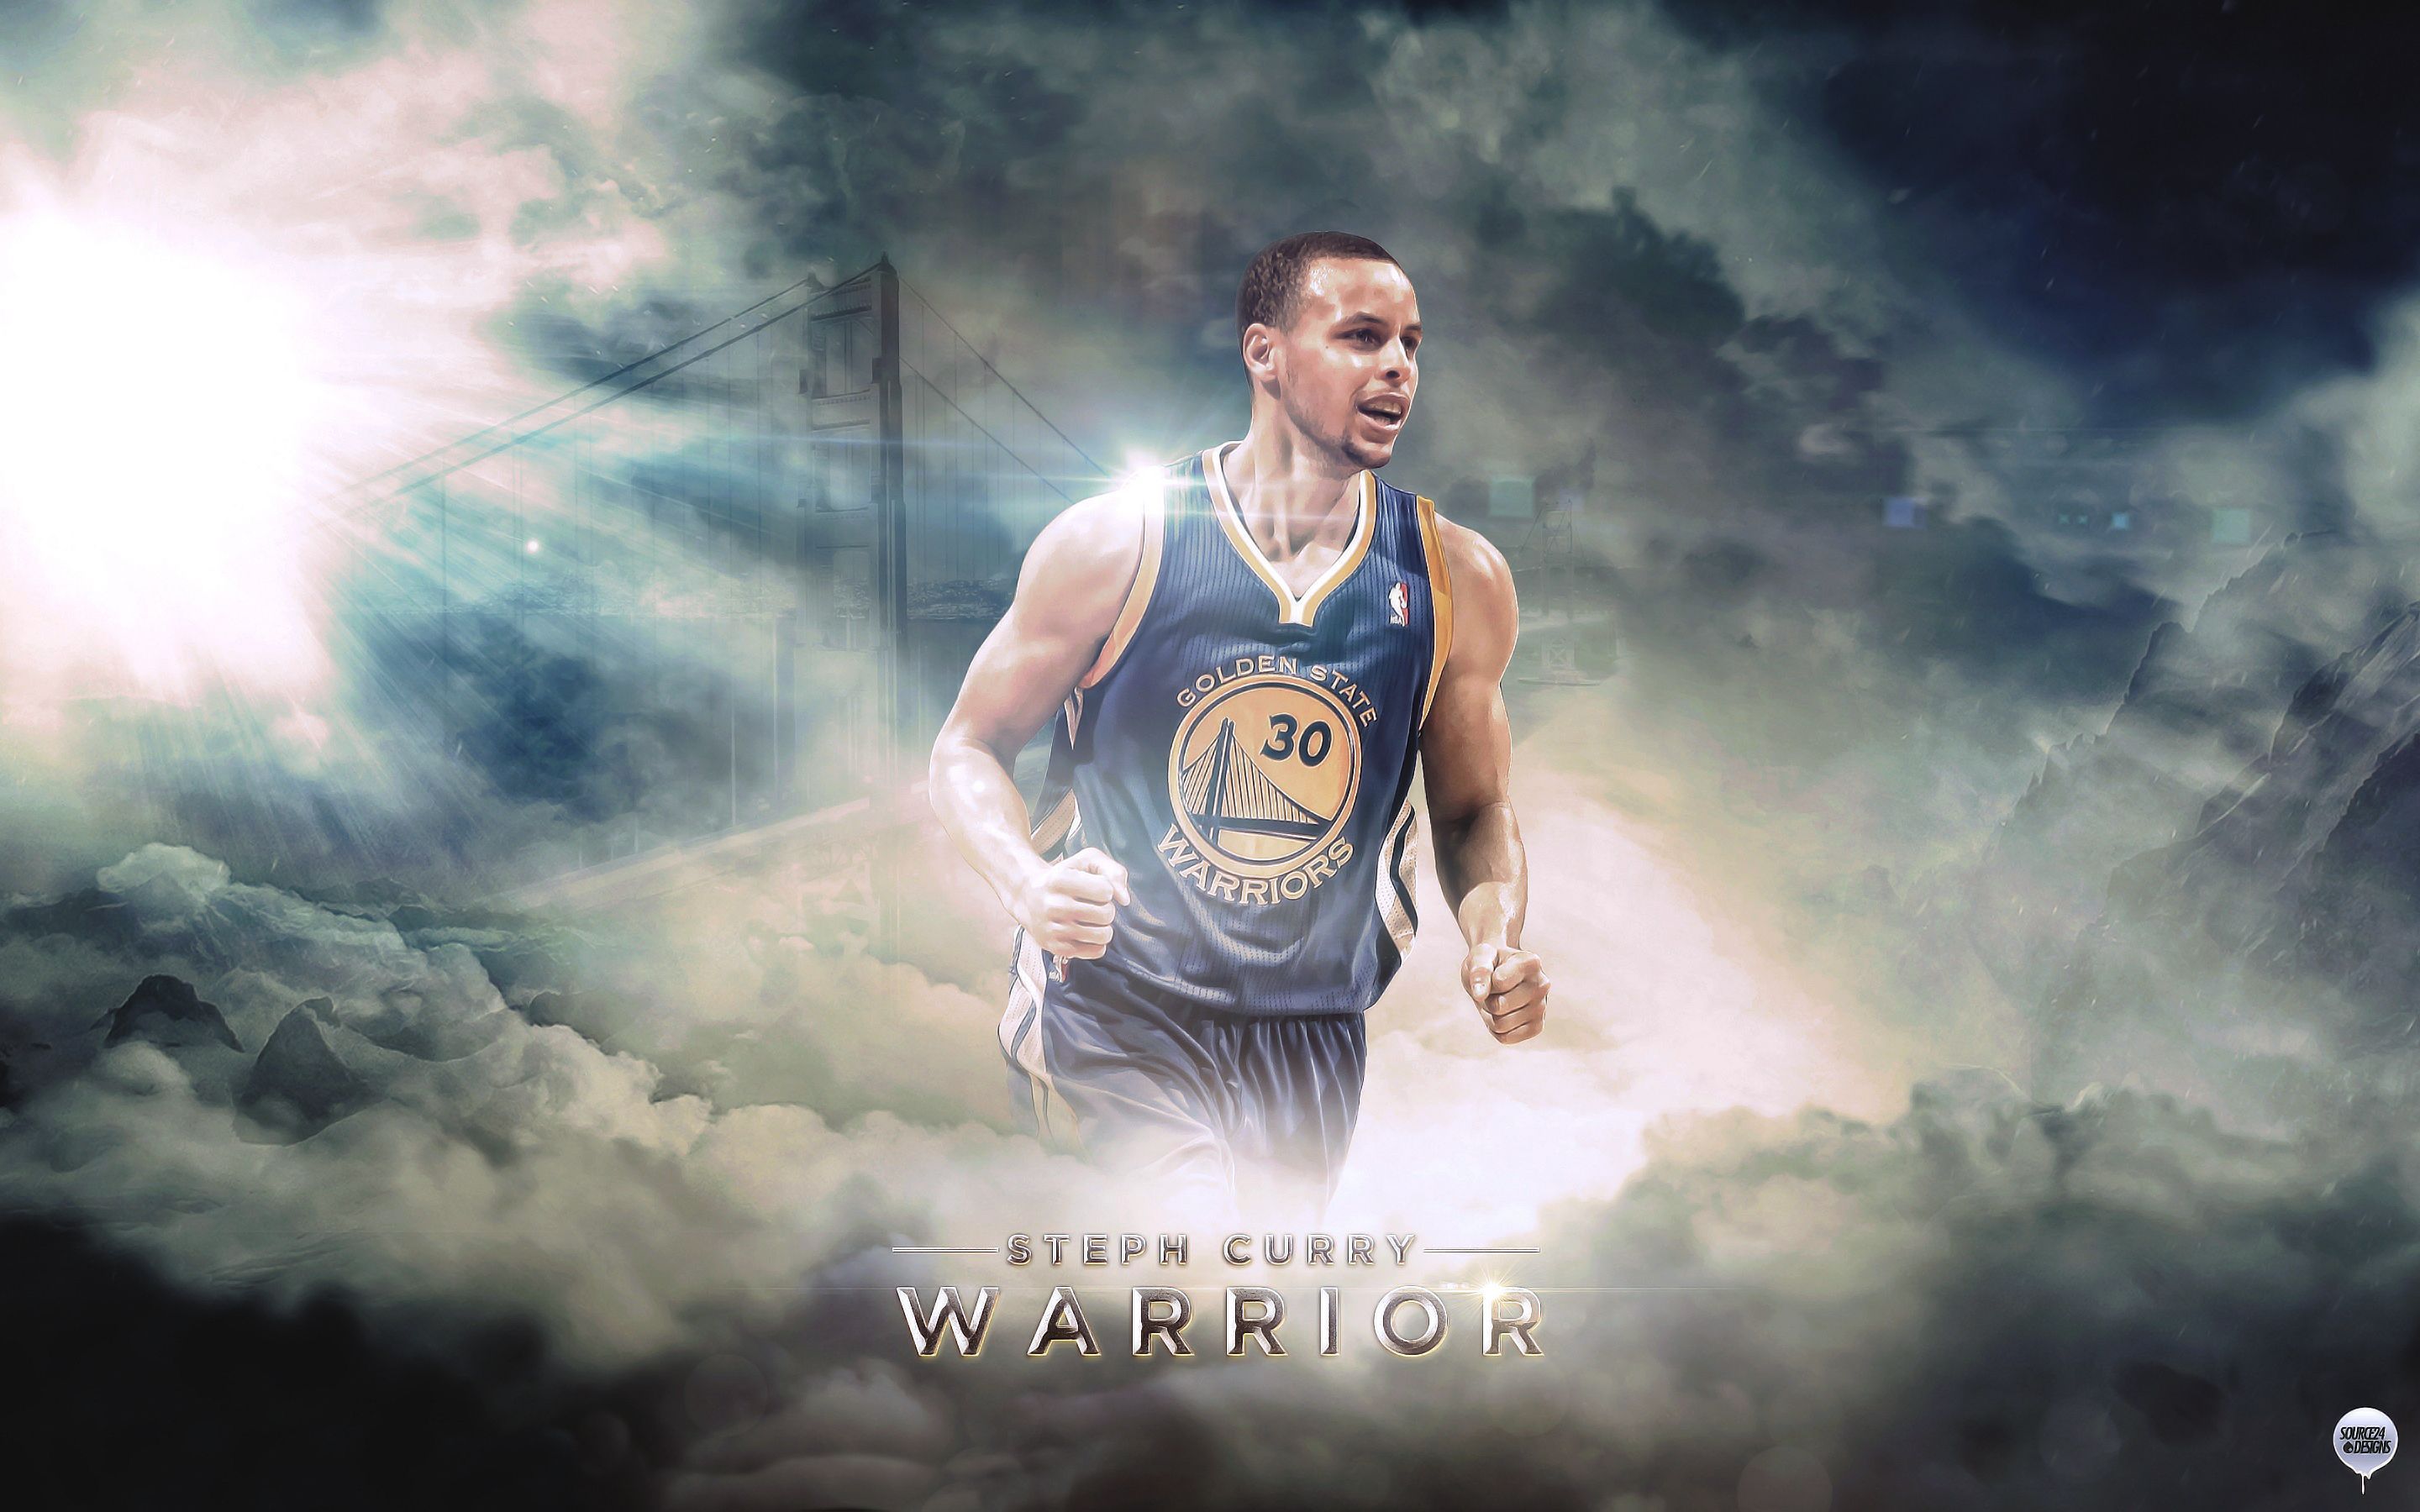 Stephen Curry Basketball Player Wallpapers HD Backgrounds